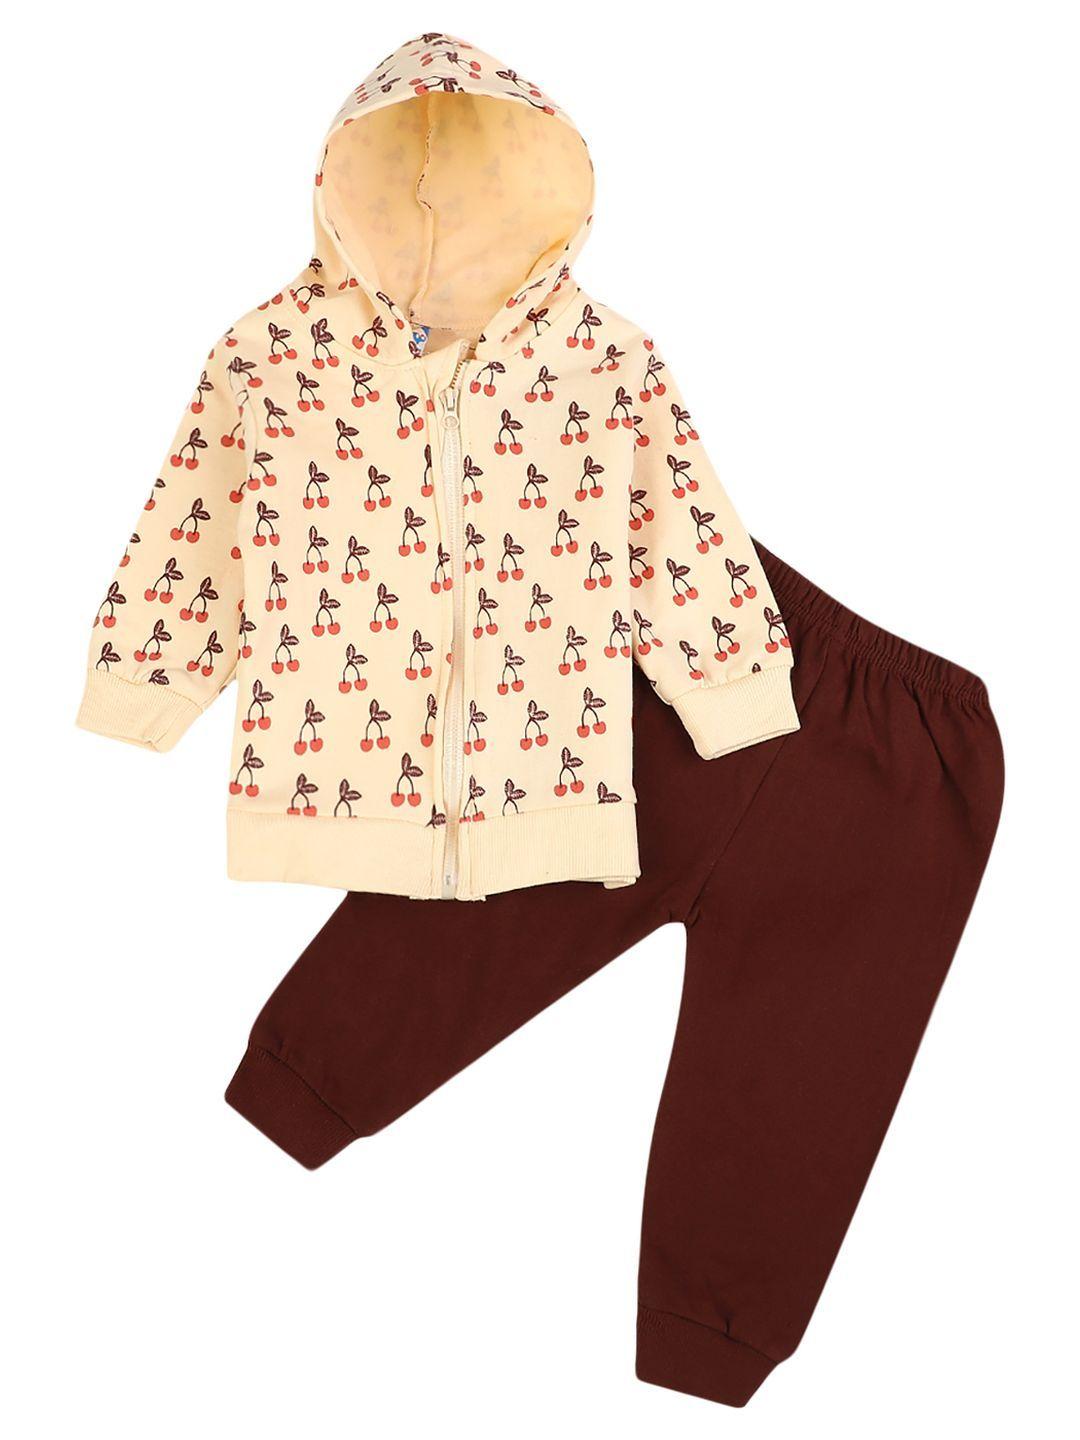 v-mart unisex kids cream-coloured & brown printed t-shirt with trousers